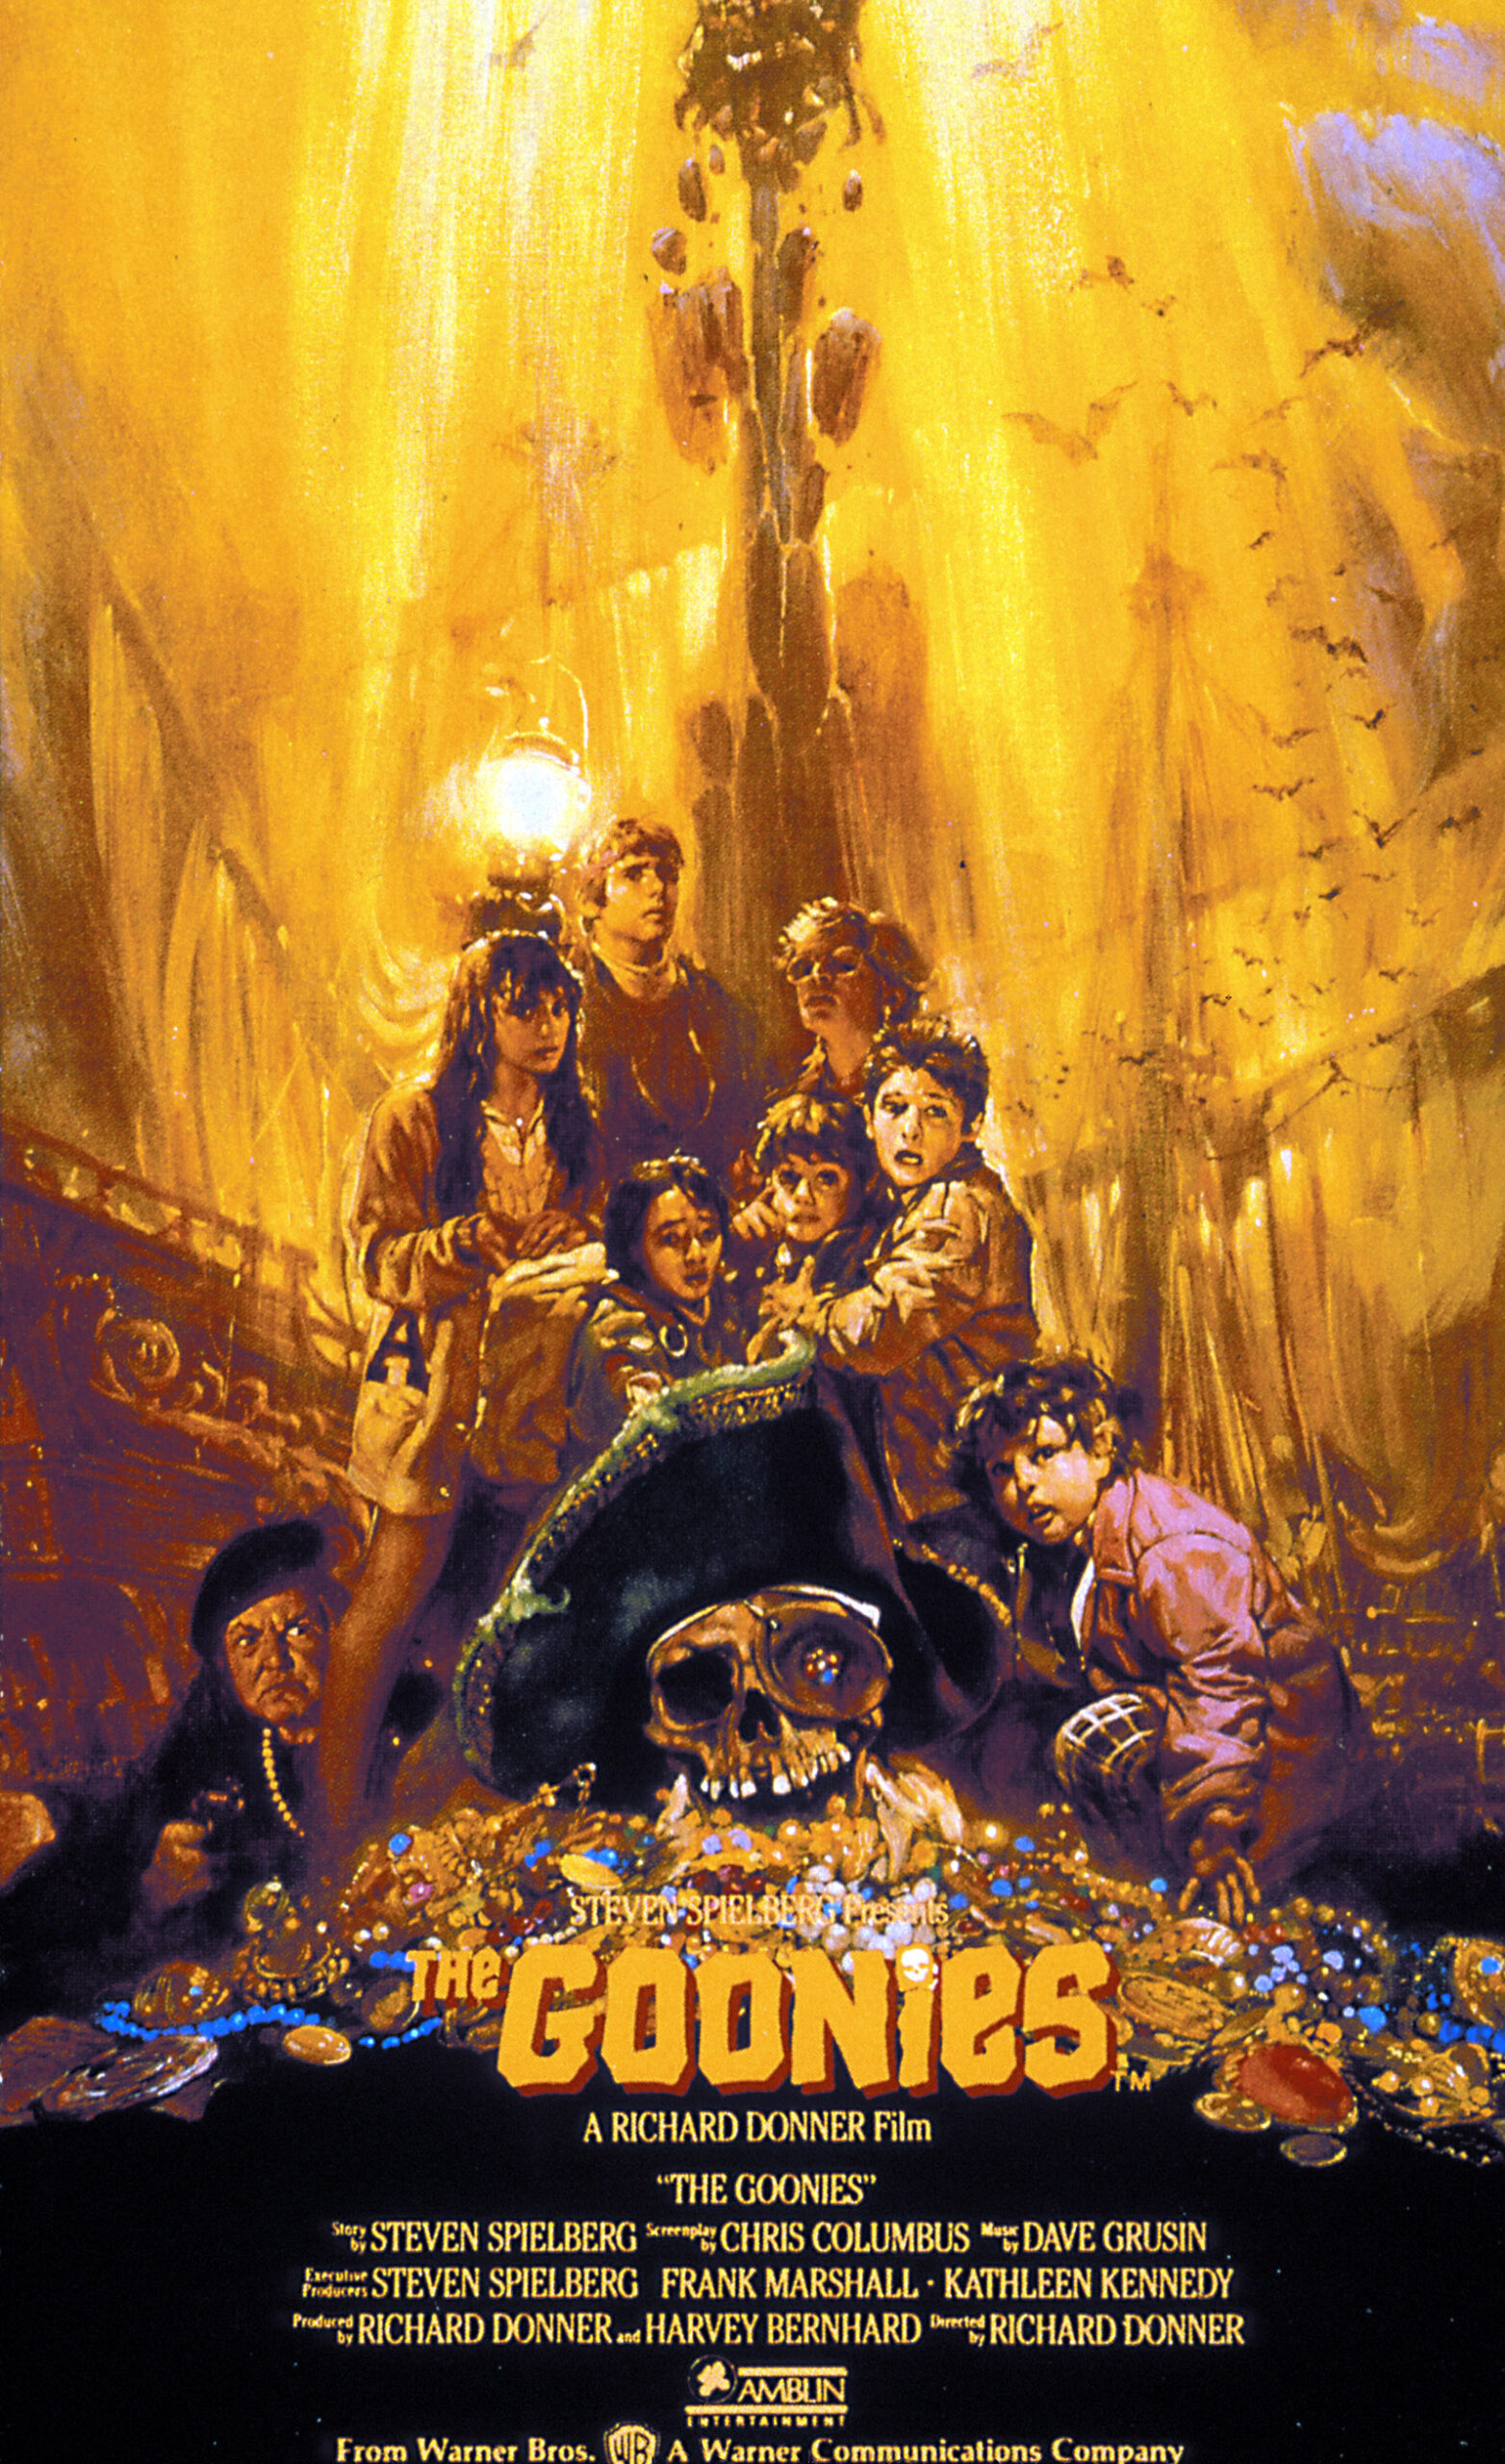 poster art for the 1985 movie "The Goonies."